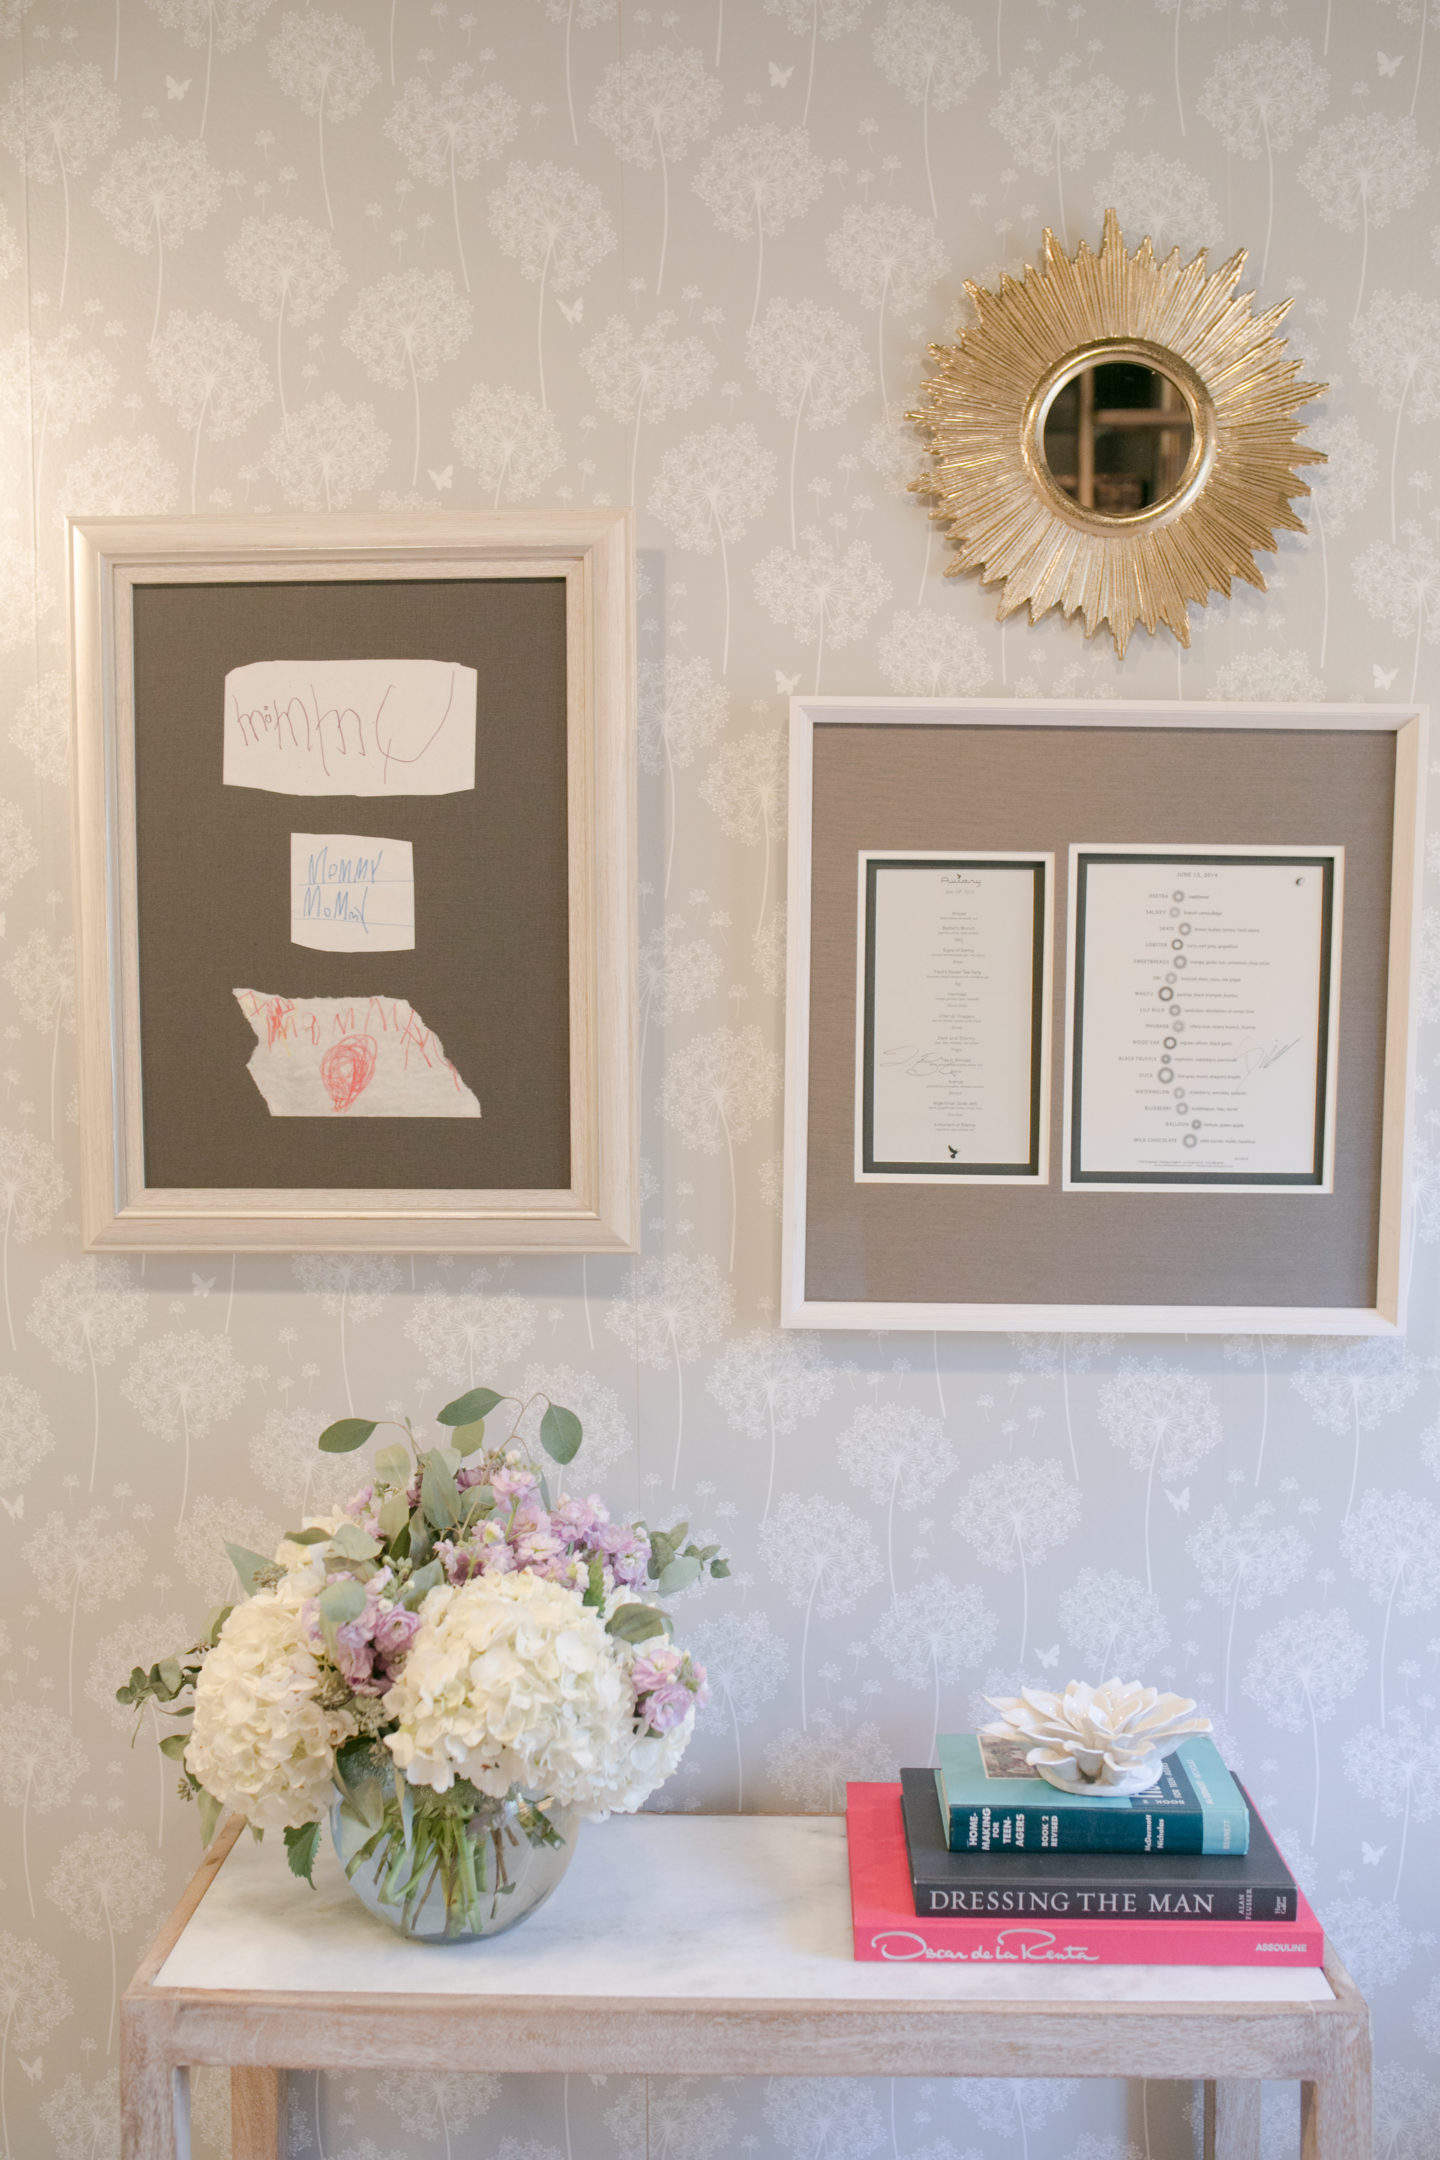 Wall pops wallpaper dandelion wallpaper hung with personal art and a gold starburst mirror and hydrangea floral arrangement on a white console table